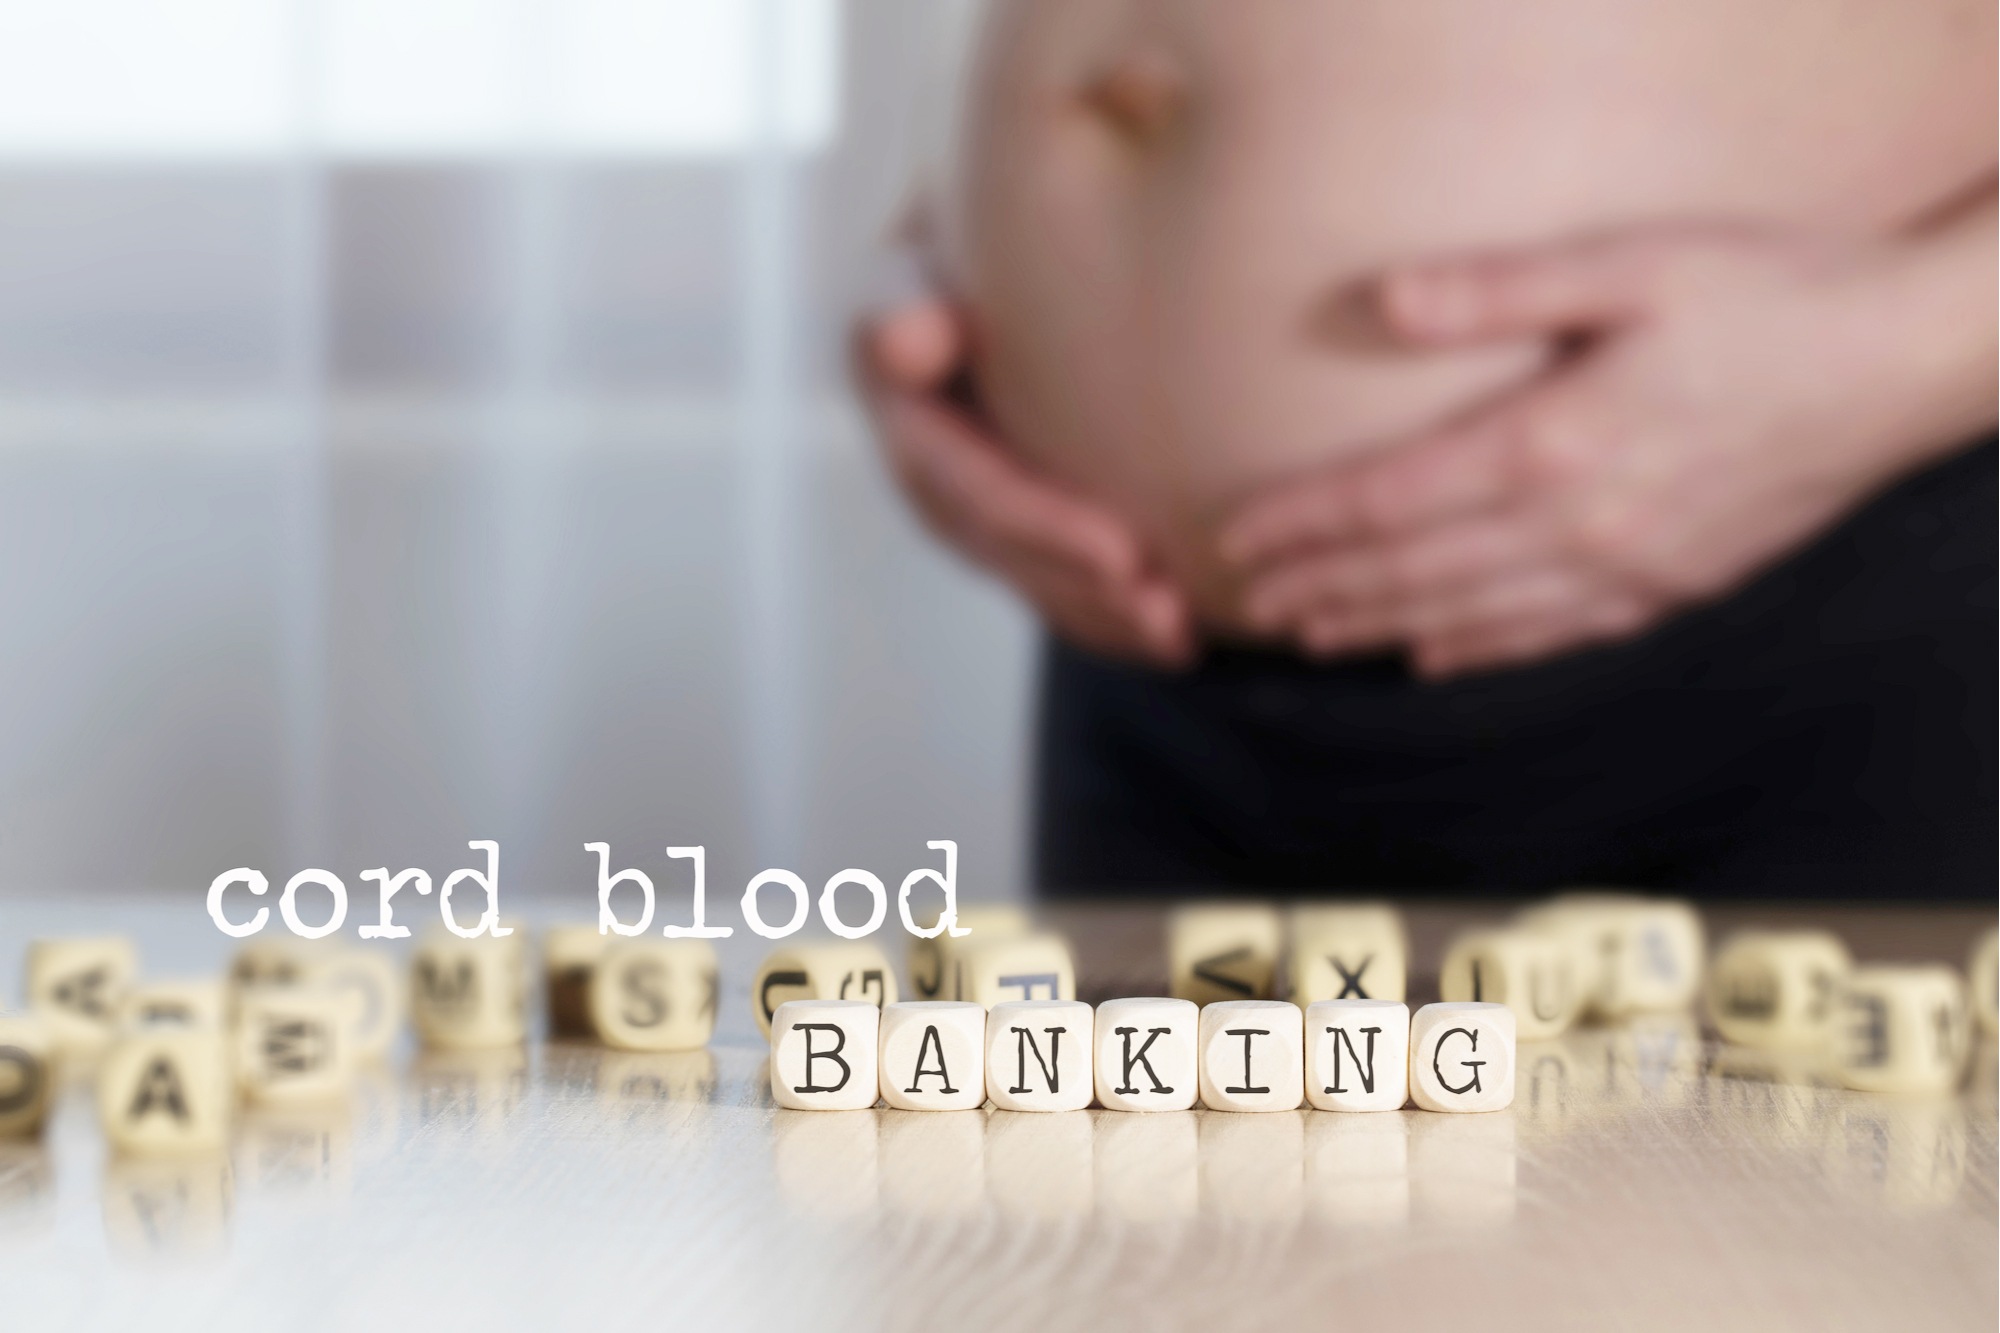 Is cord blood banking worth it?